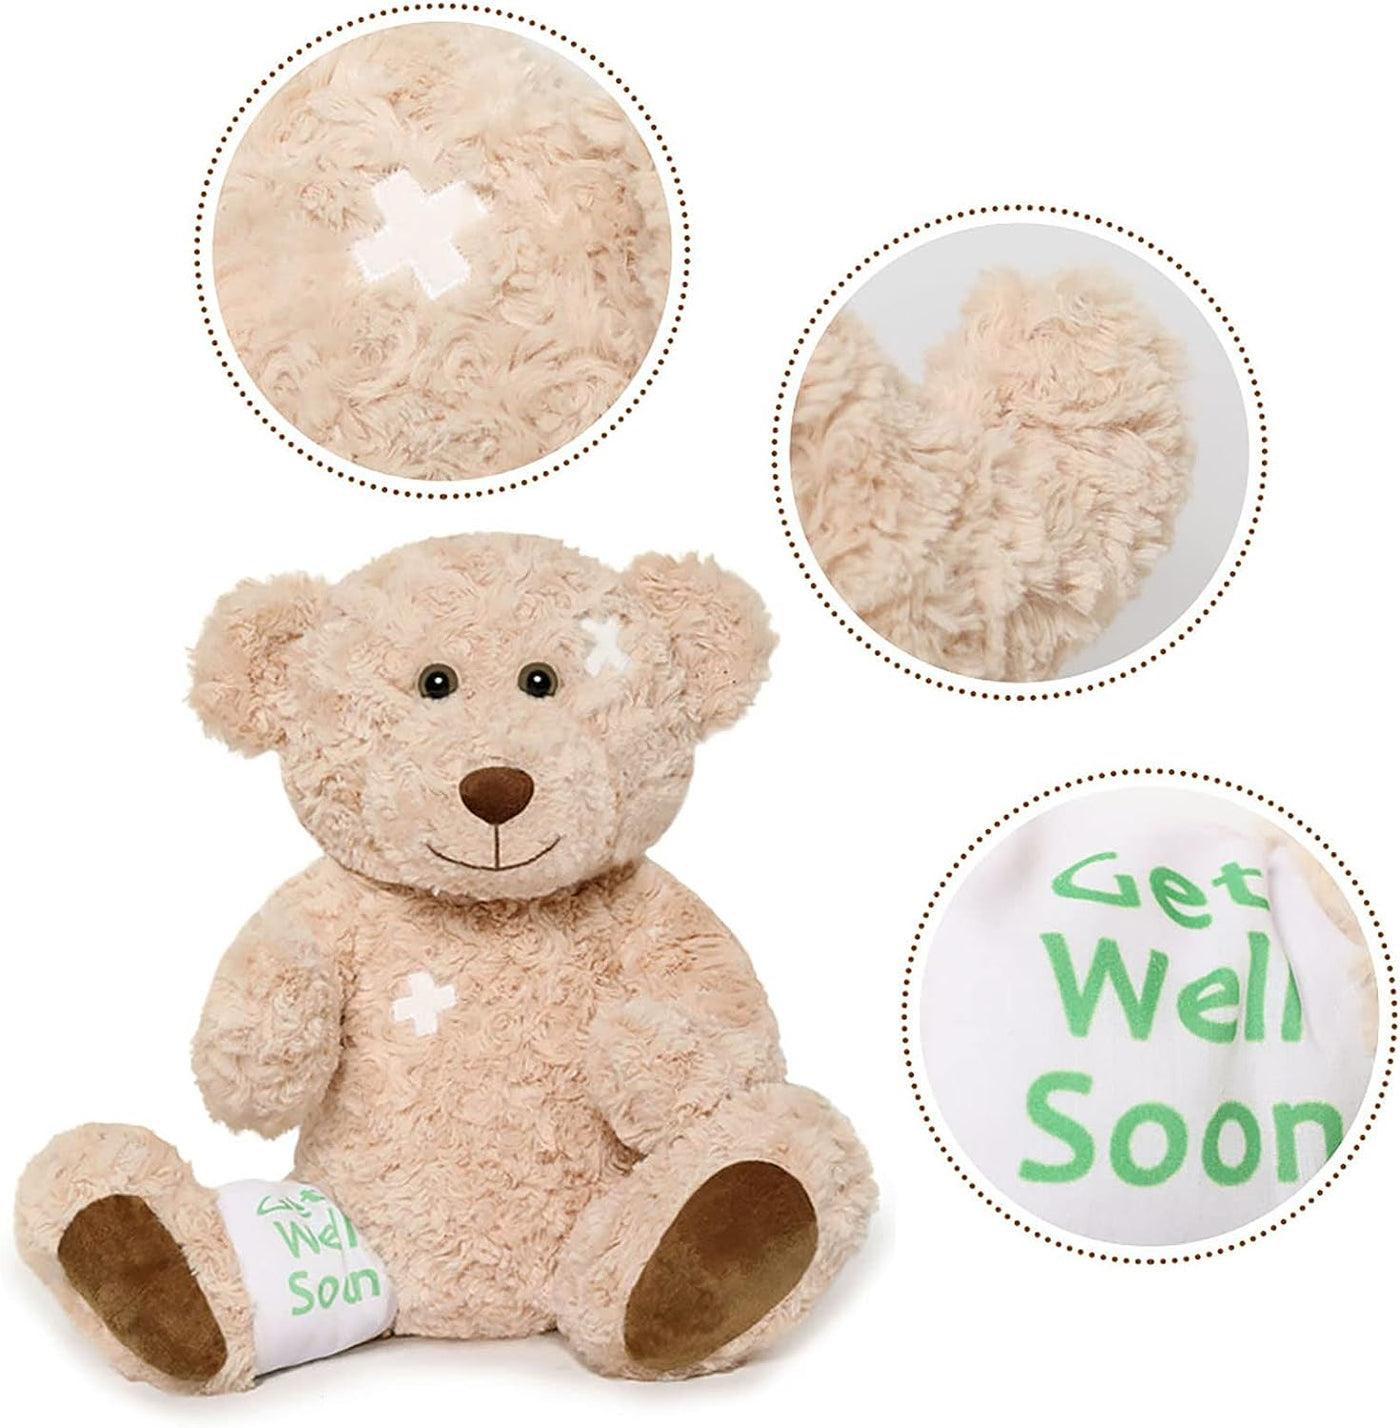 Get Well Soon Teddy Bear, Brown, 13.8 Inches